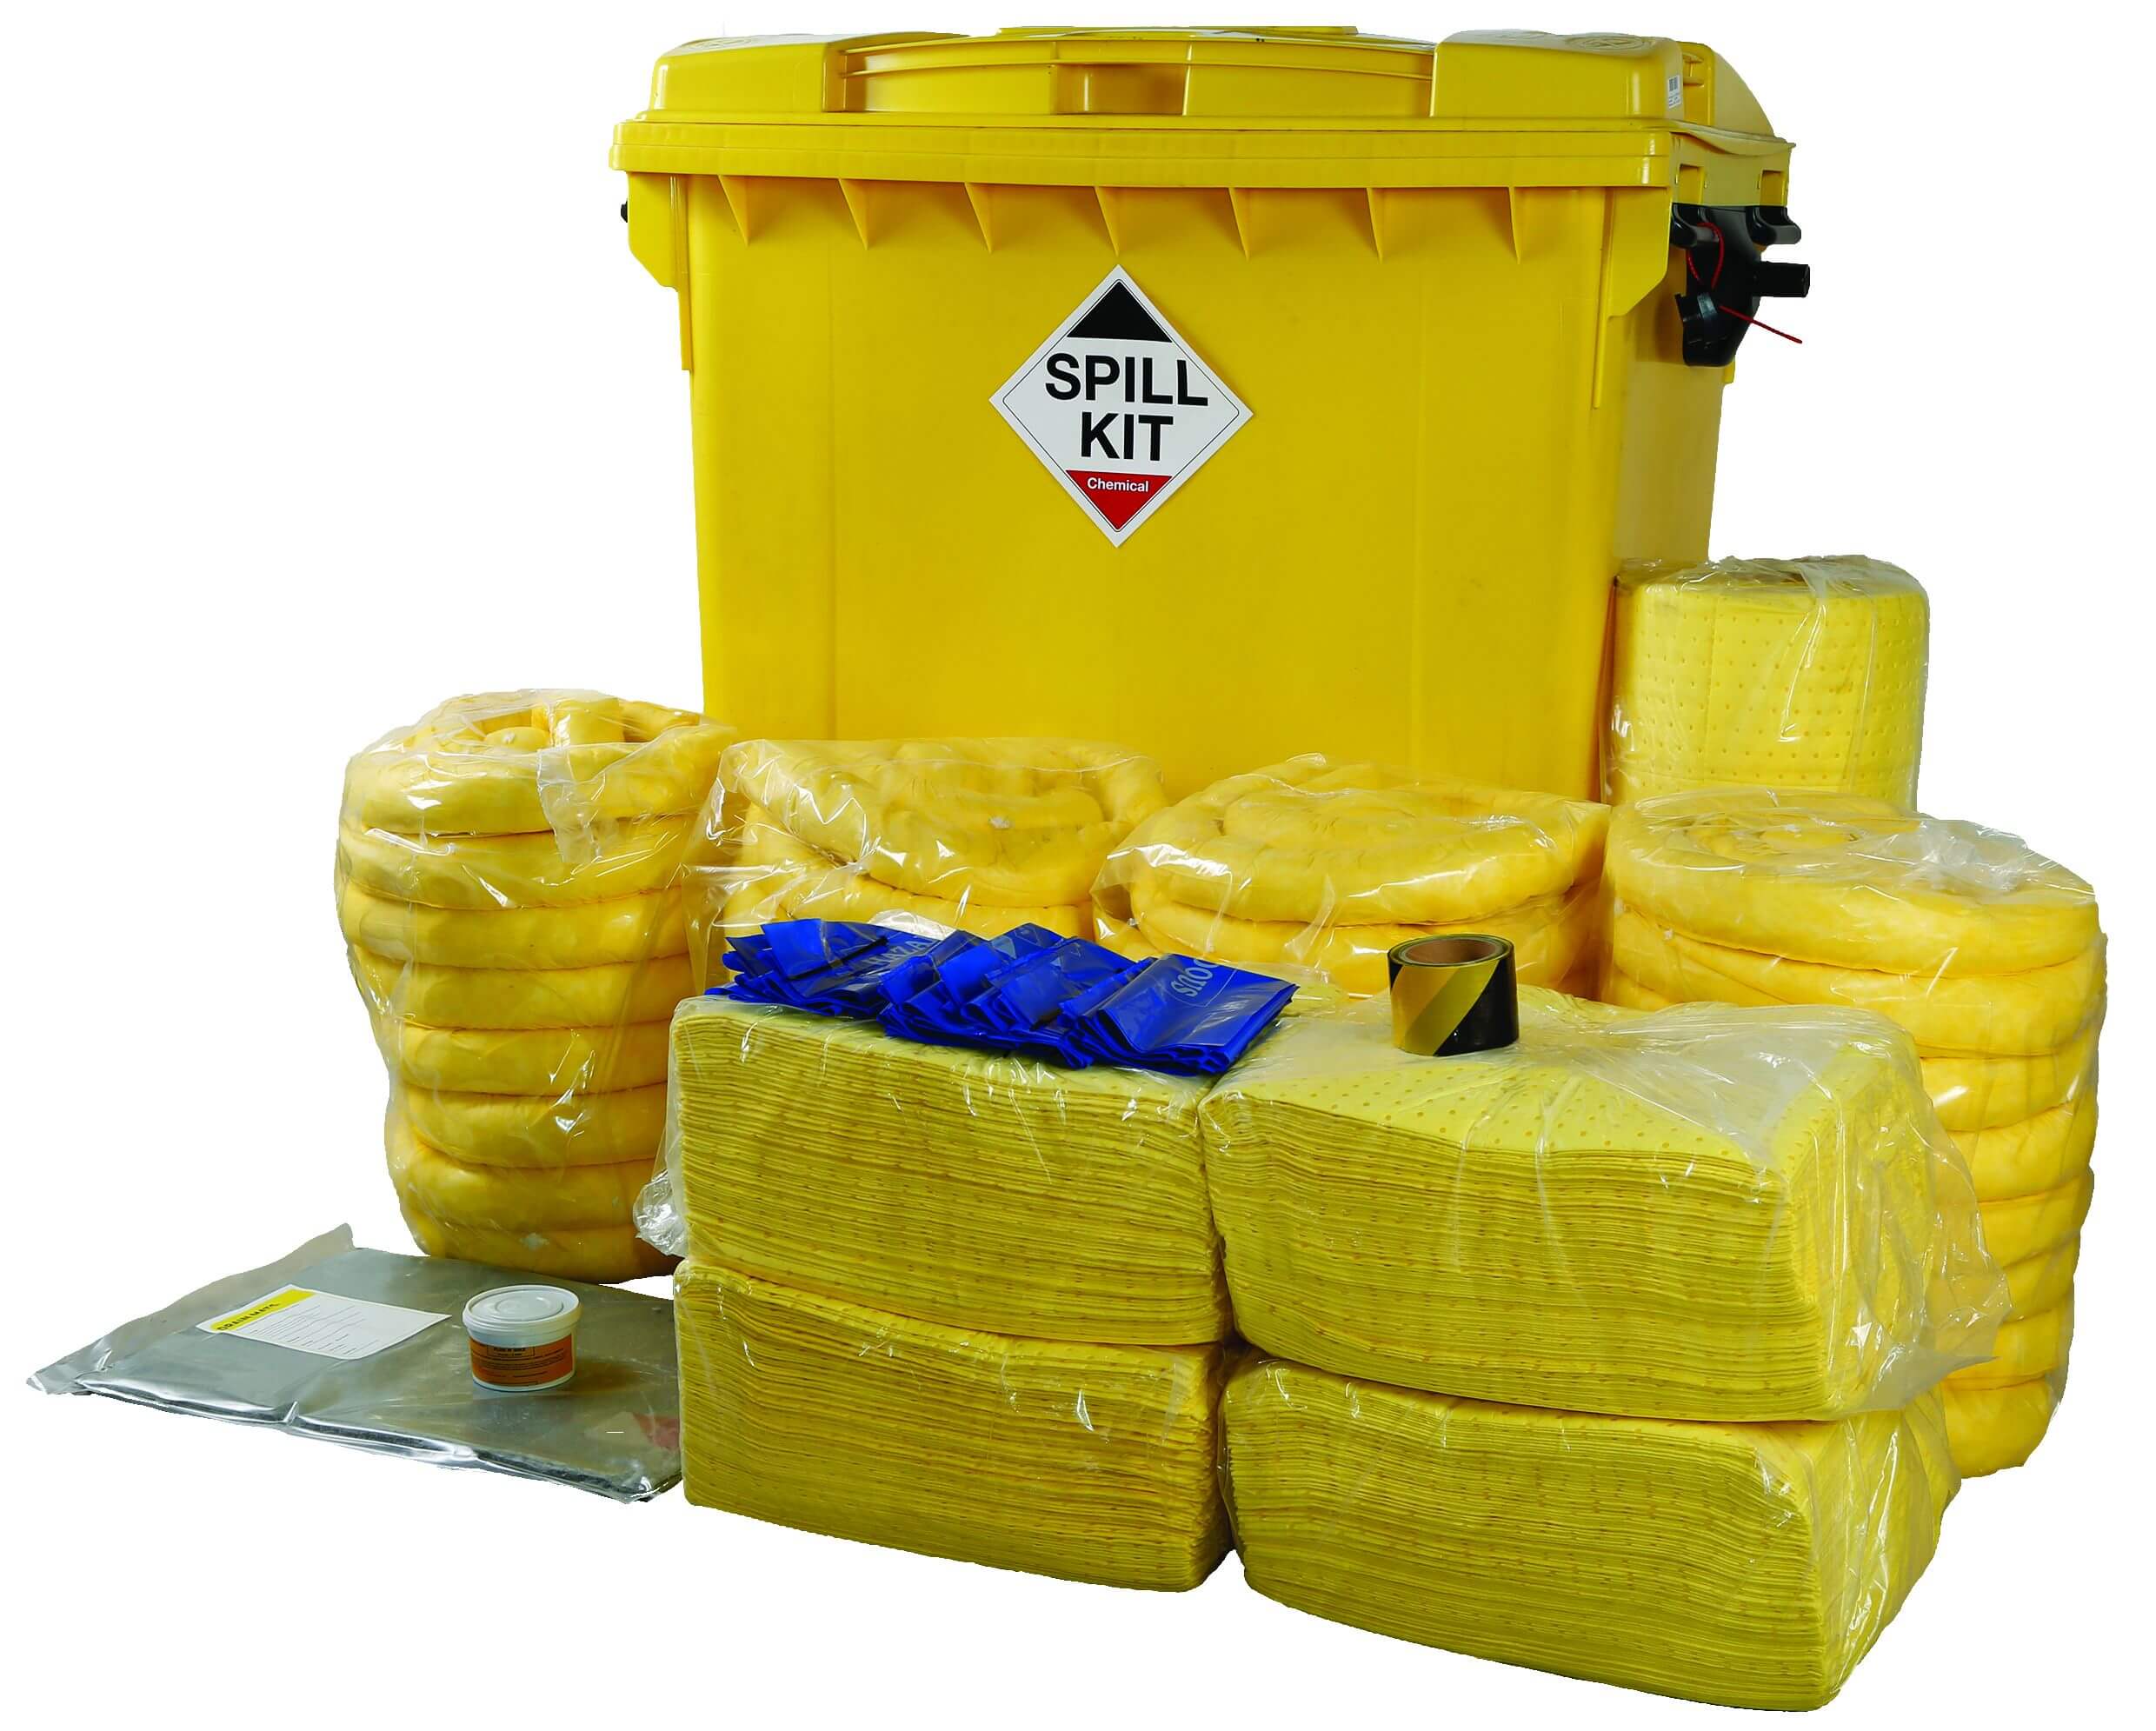 Types of Spill Kits and Their Applications